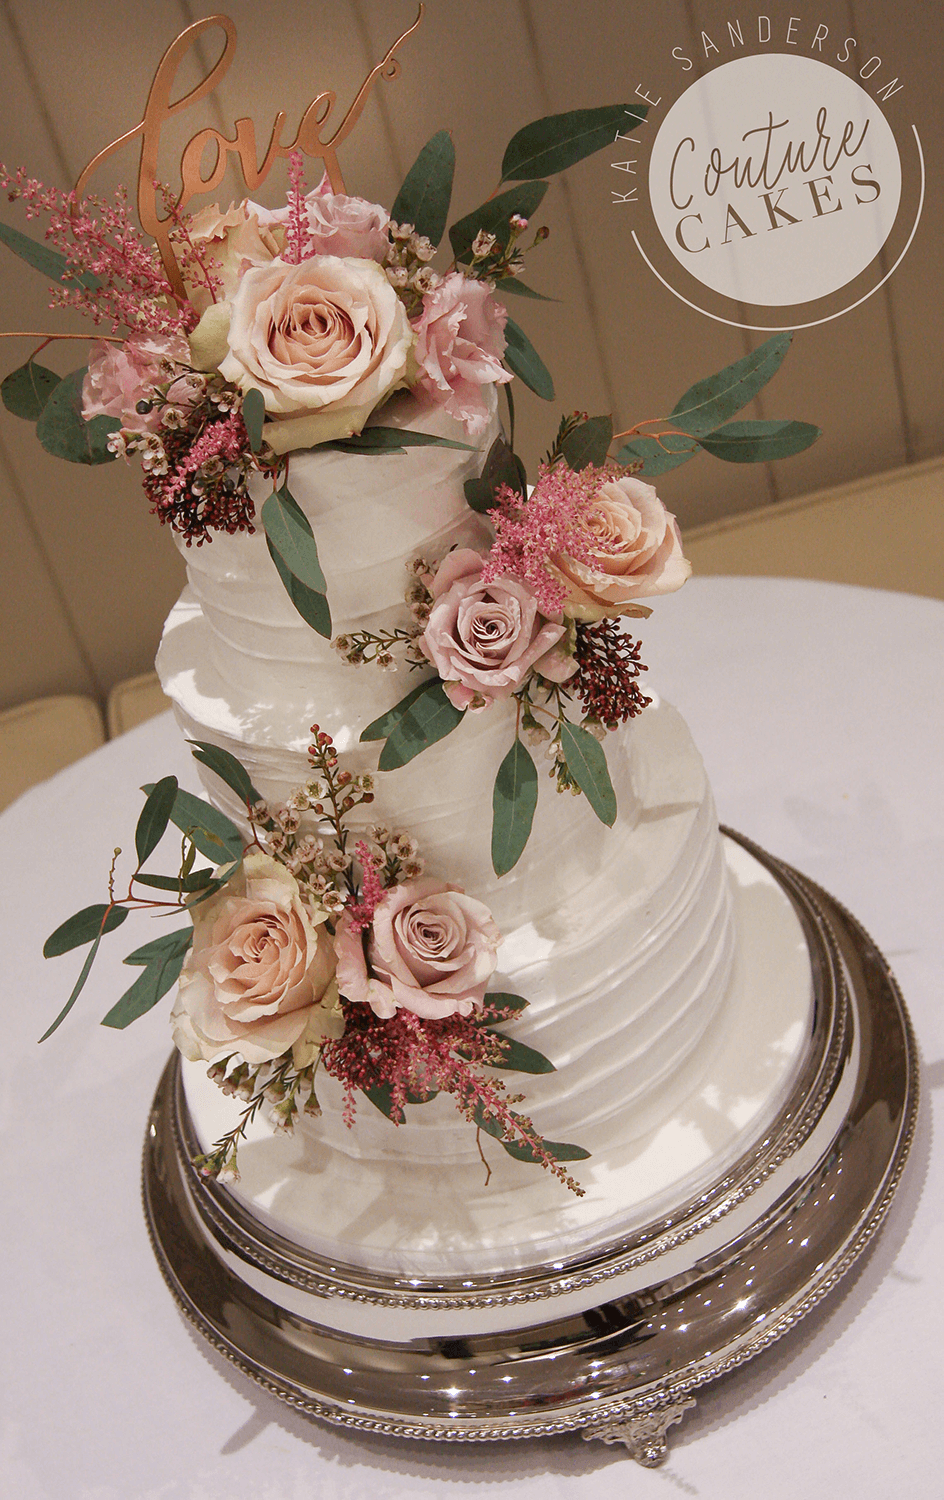 Rustic Iced Wedding Cake: Serves 100 portions, Price category B £490 excluding flowers